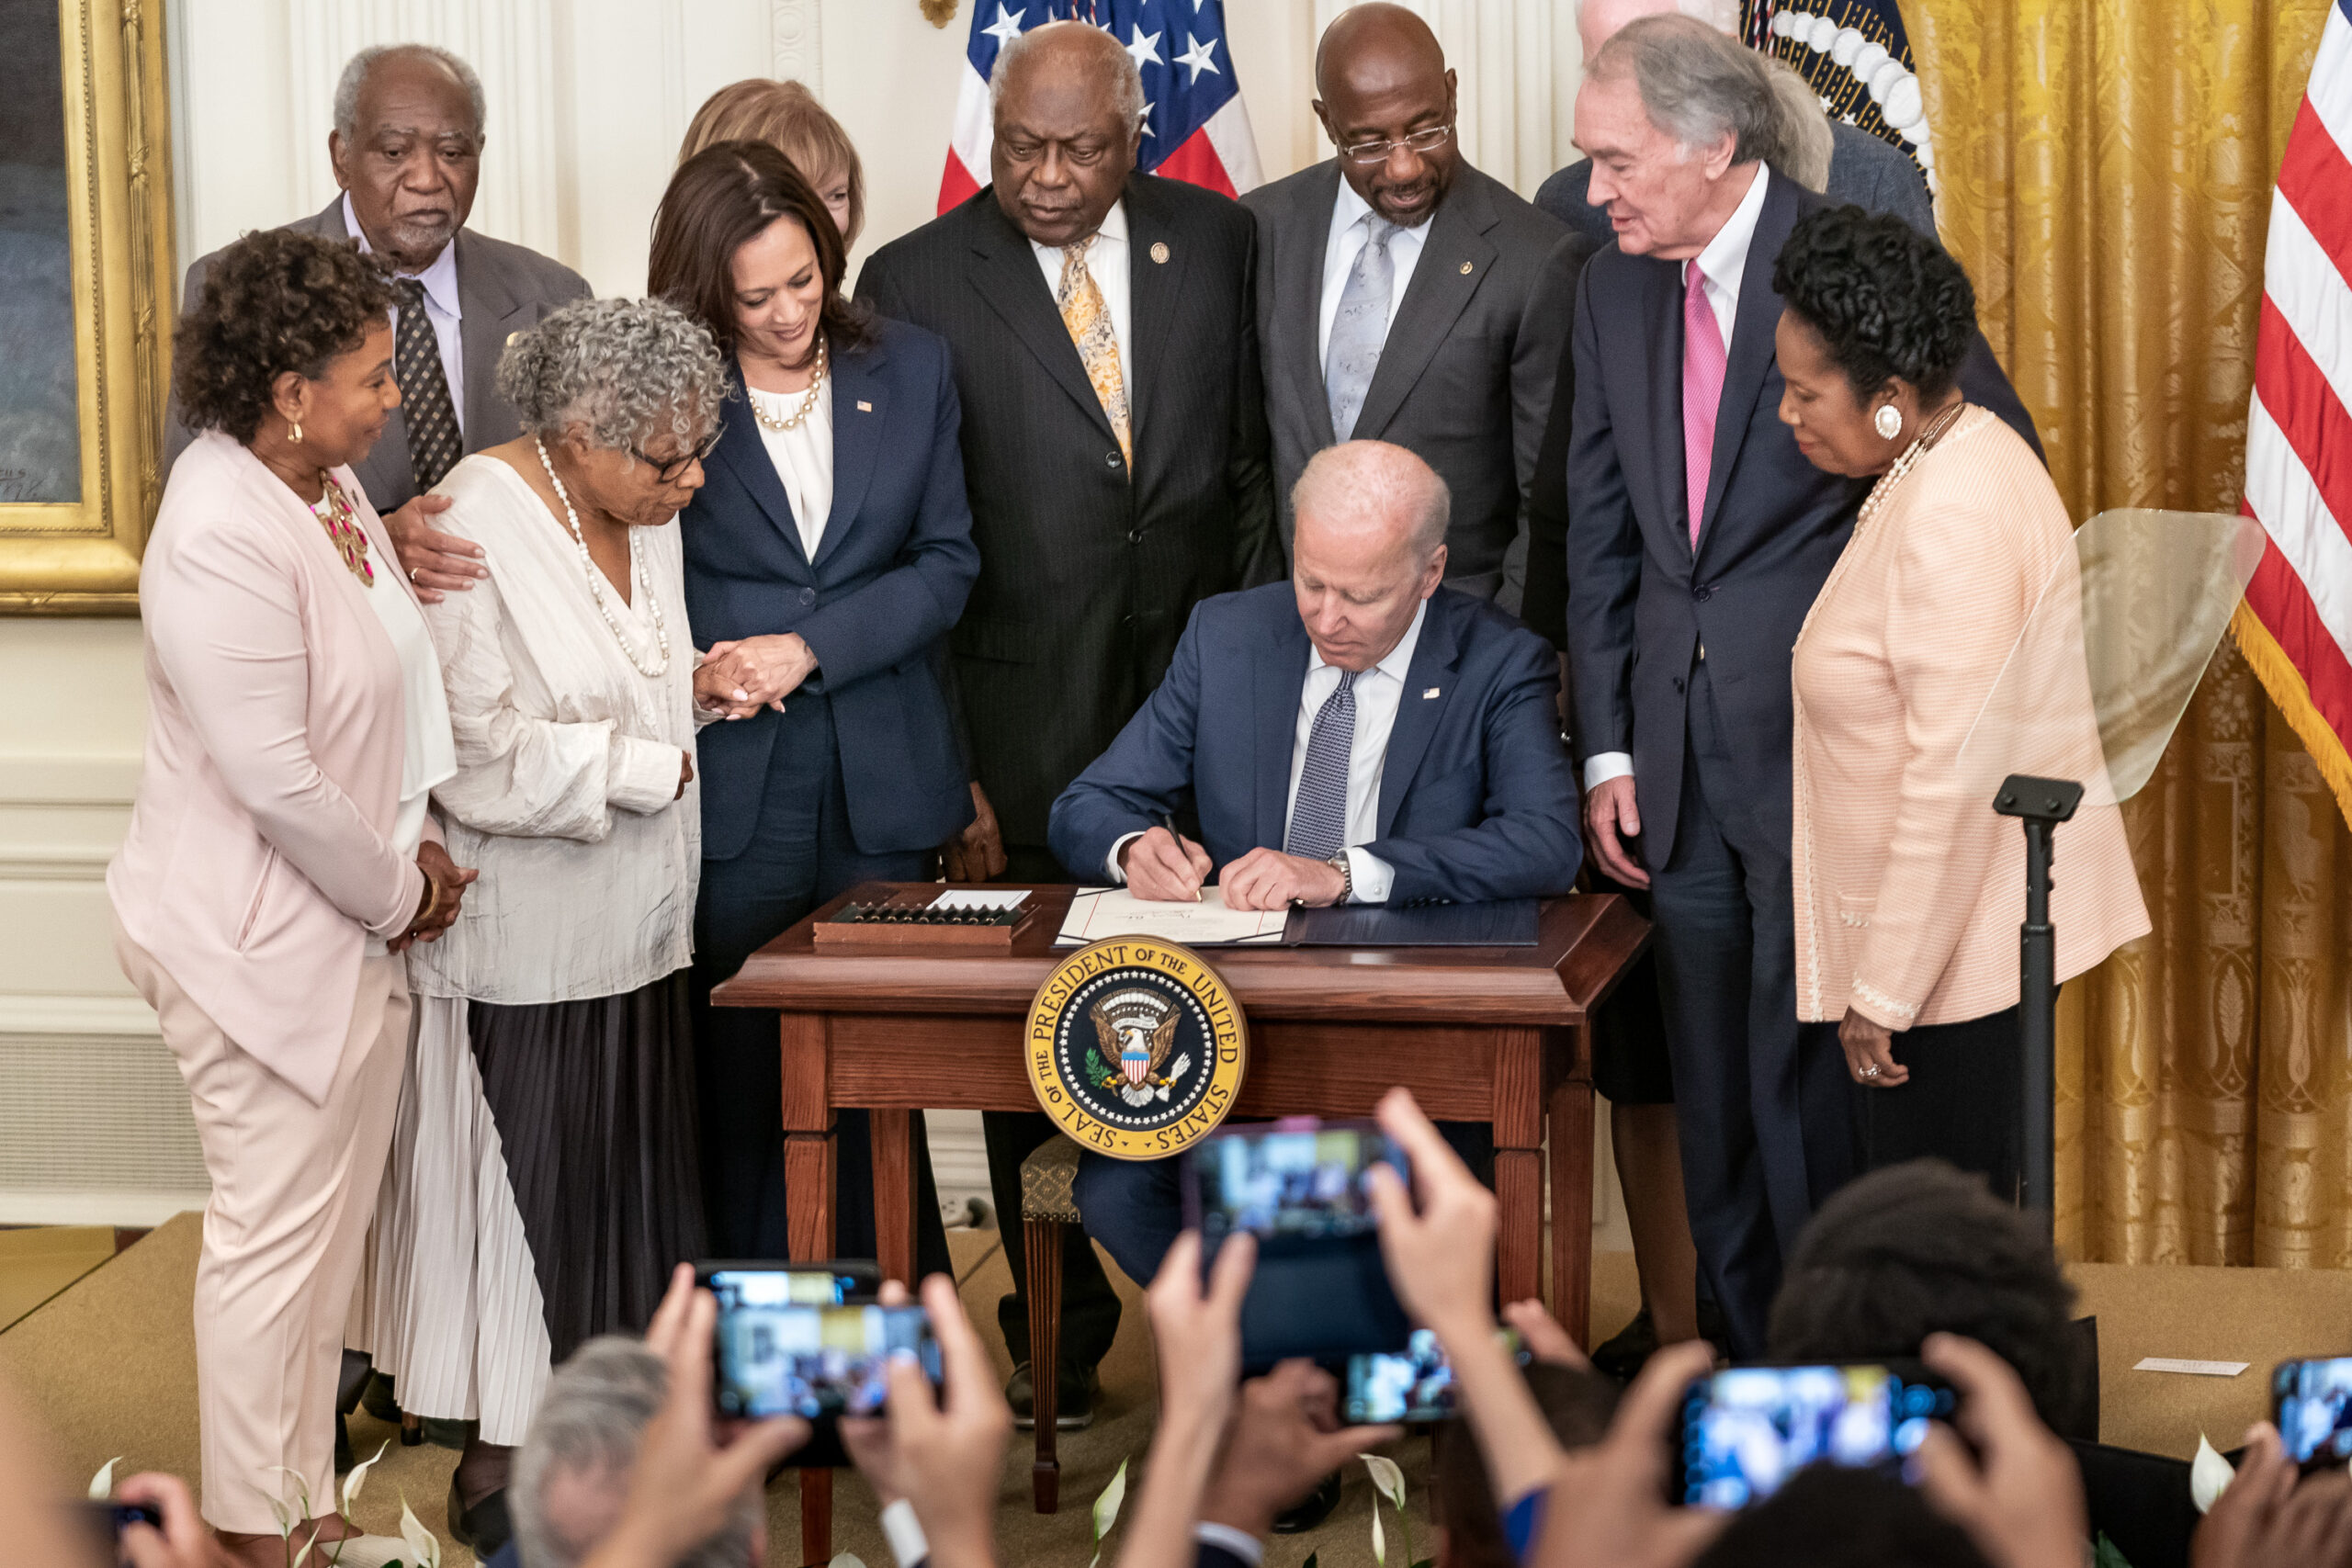 President Biden signs the Juneteenth National Indepence Day Act